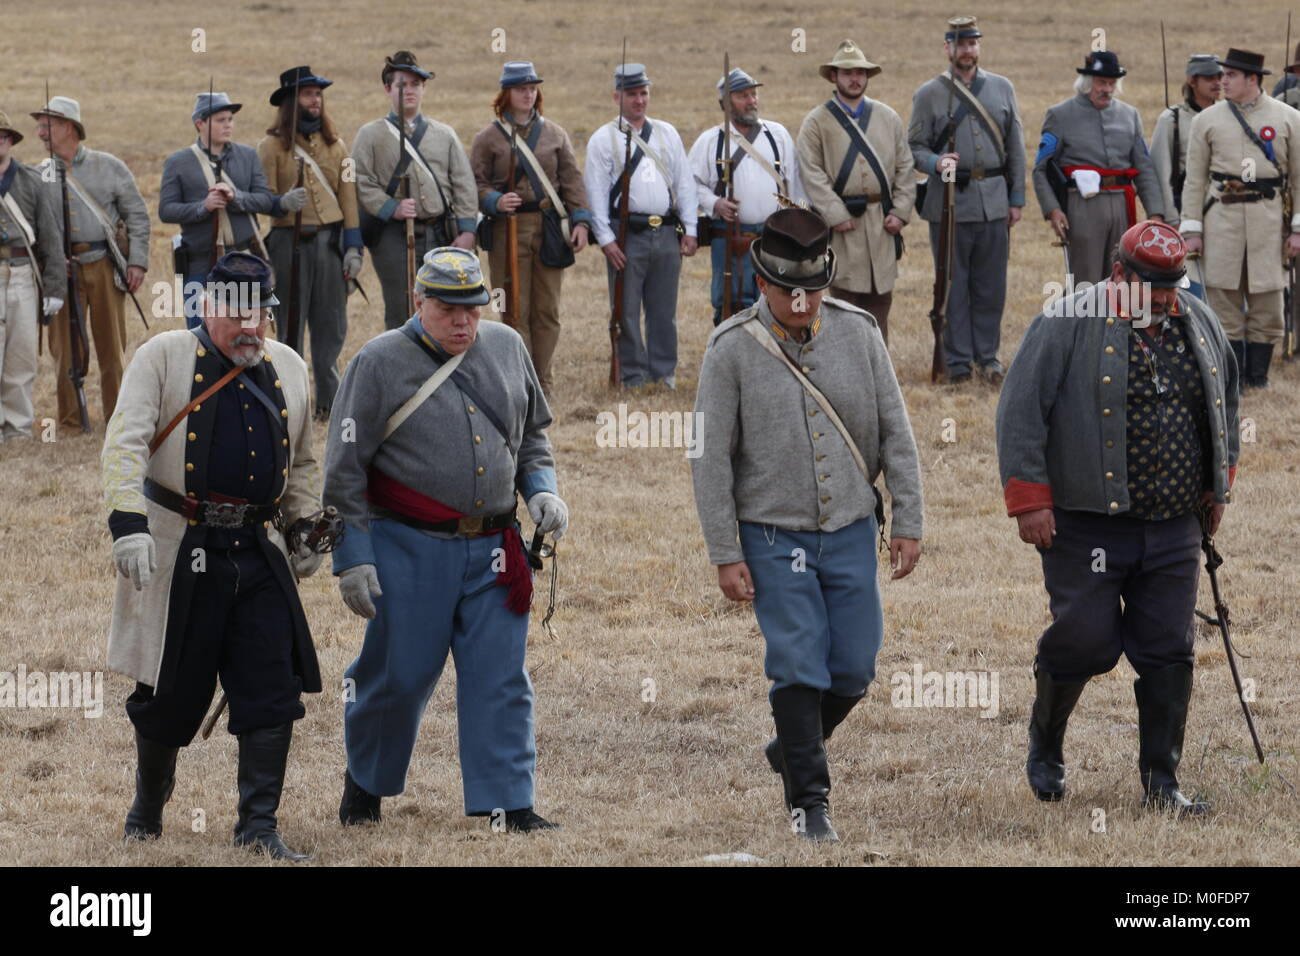 Confederate troops at a Civil War Re-enactment of a battle that happened in Hernando County, Florida in July of l864. Stock Photo